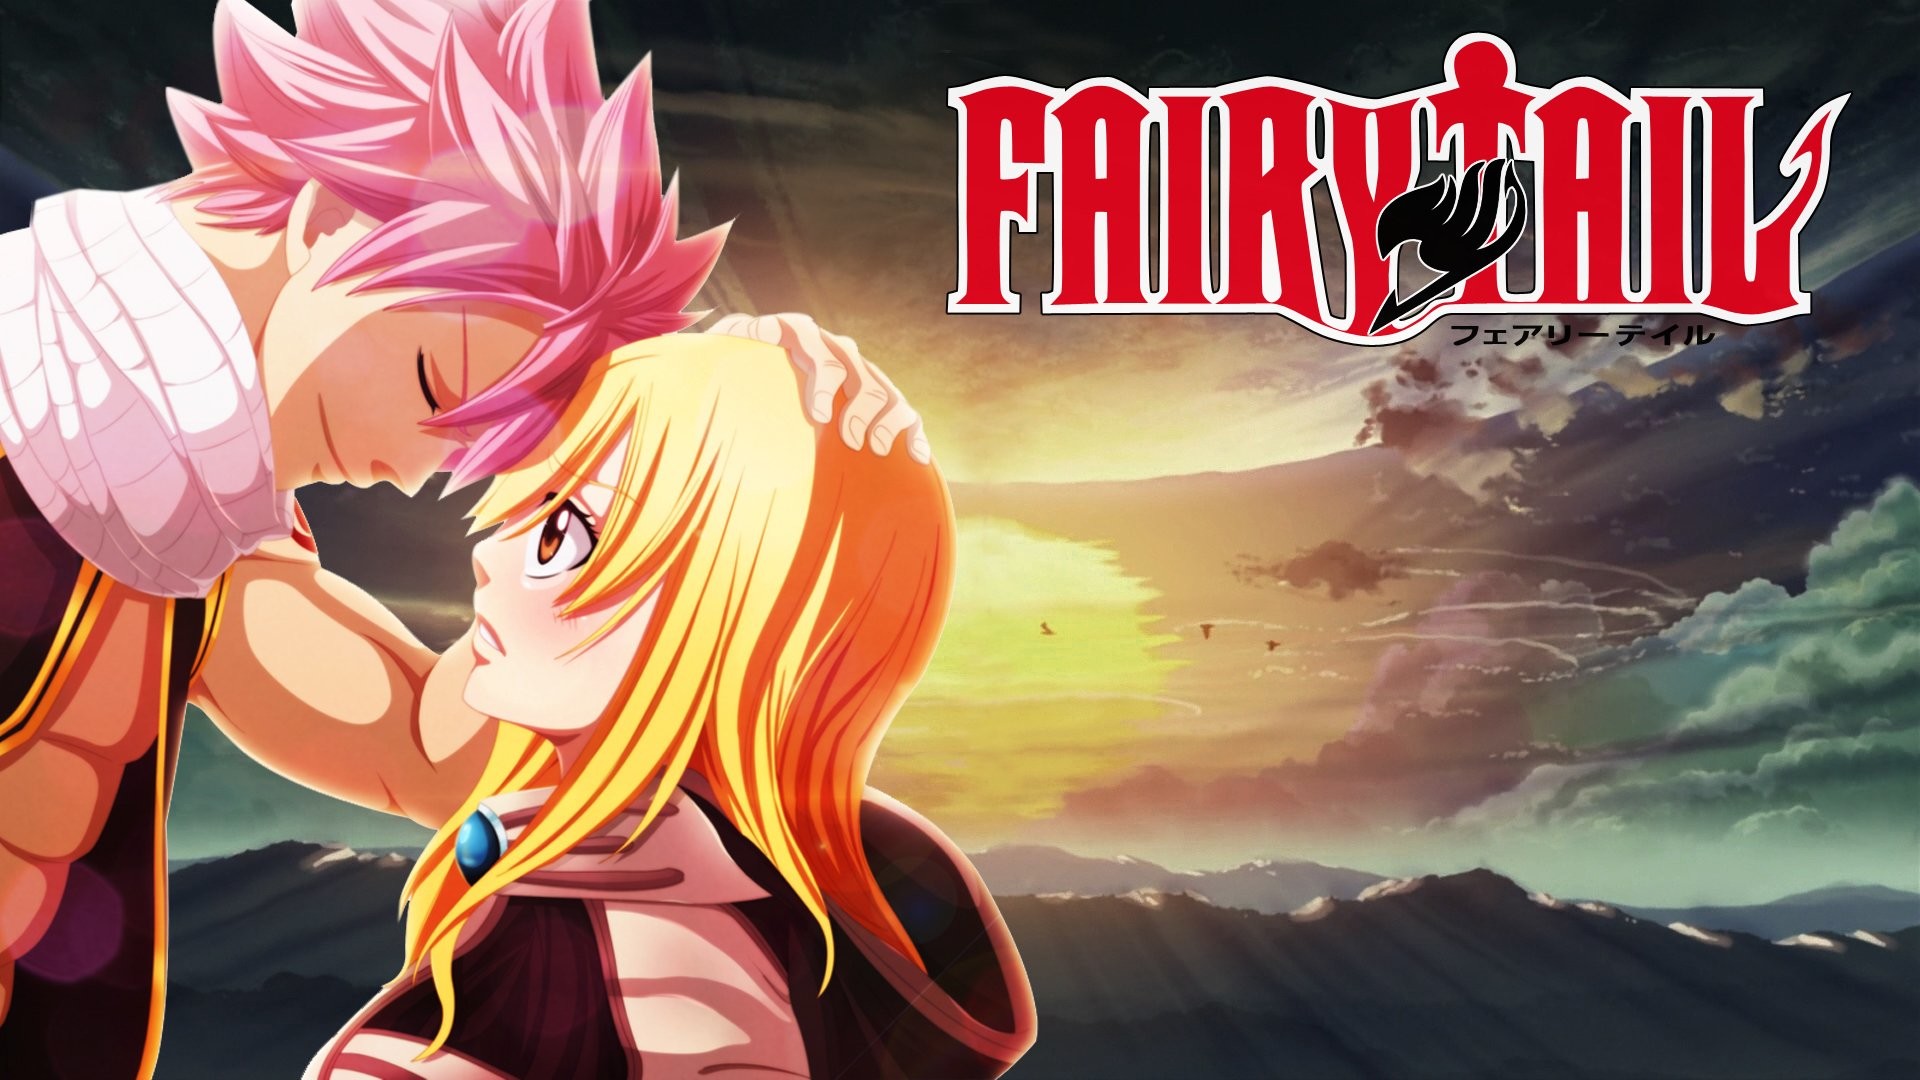 1920x1080 Love Fairy Tail Backgrounds.